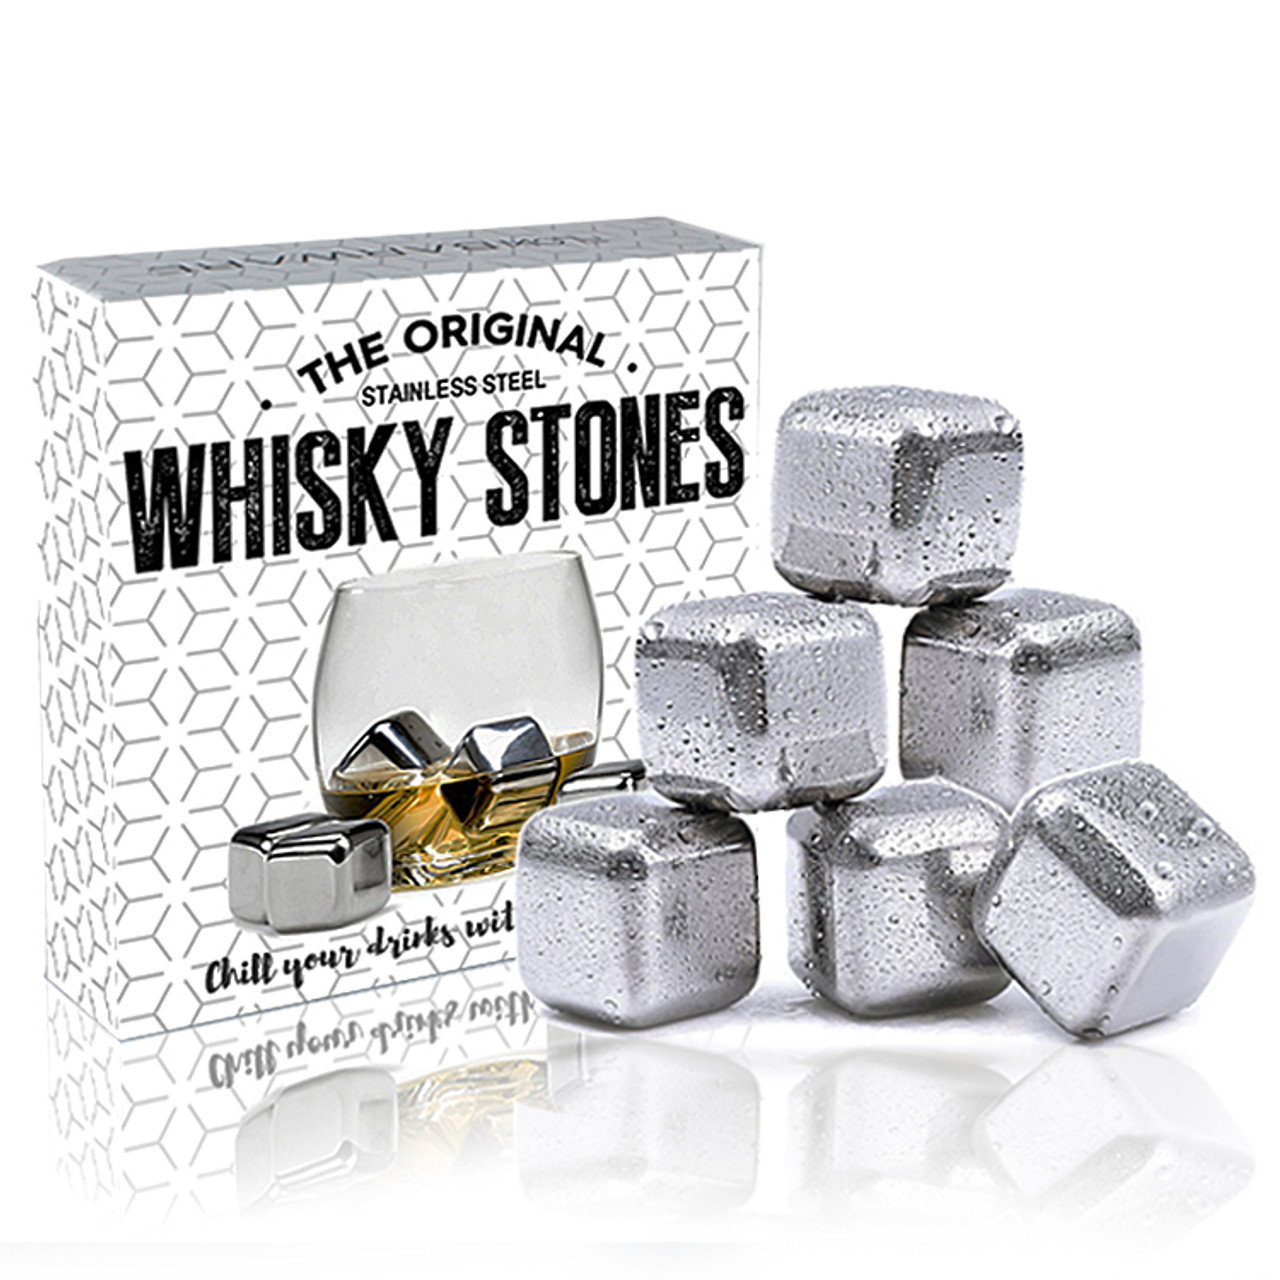  Surgical Grade Steel Whiskey Stones - BEST - Whiskey Rocks Ice  cubes - 100%: Home & Kitchen